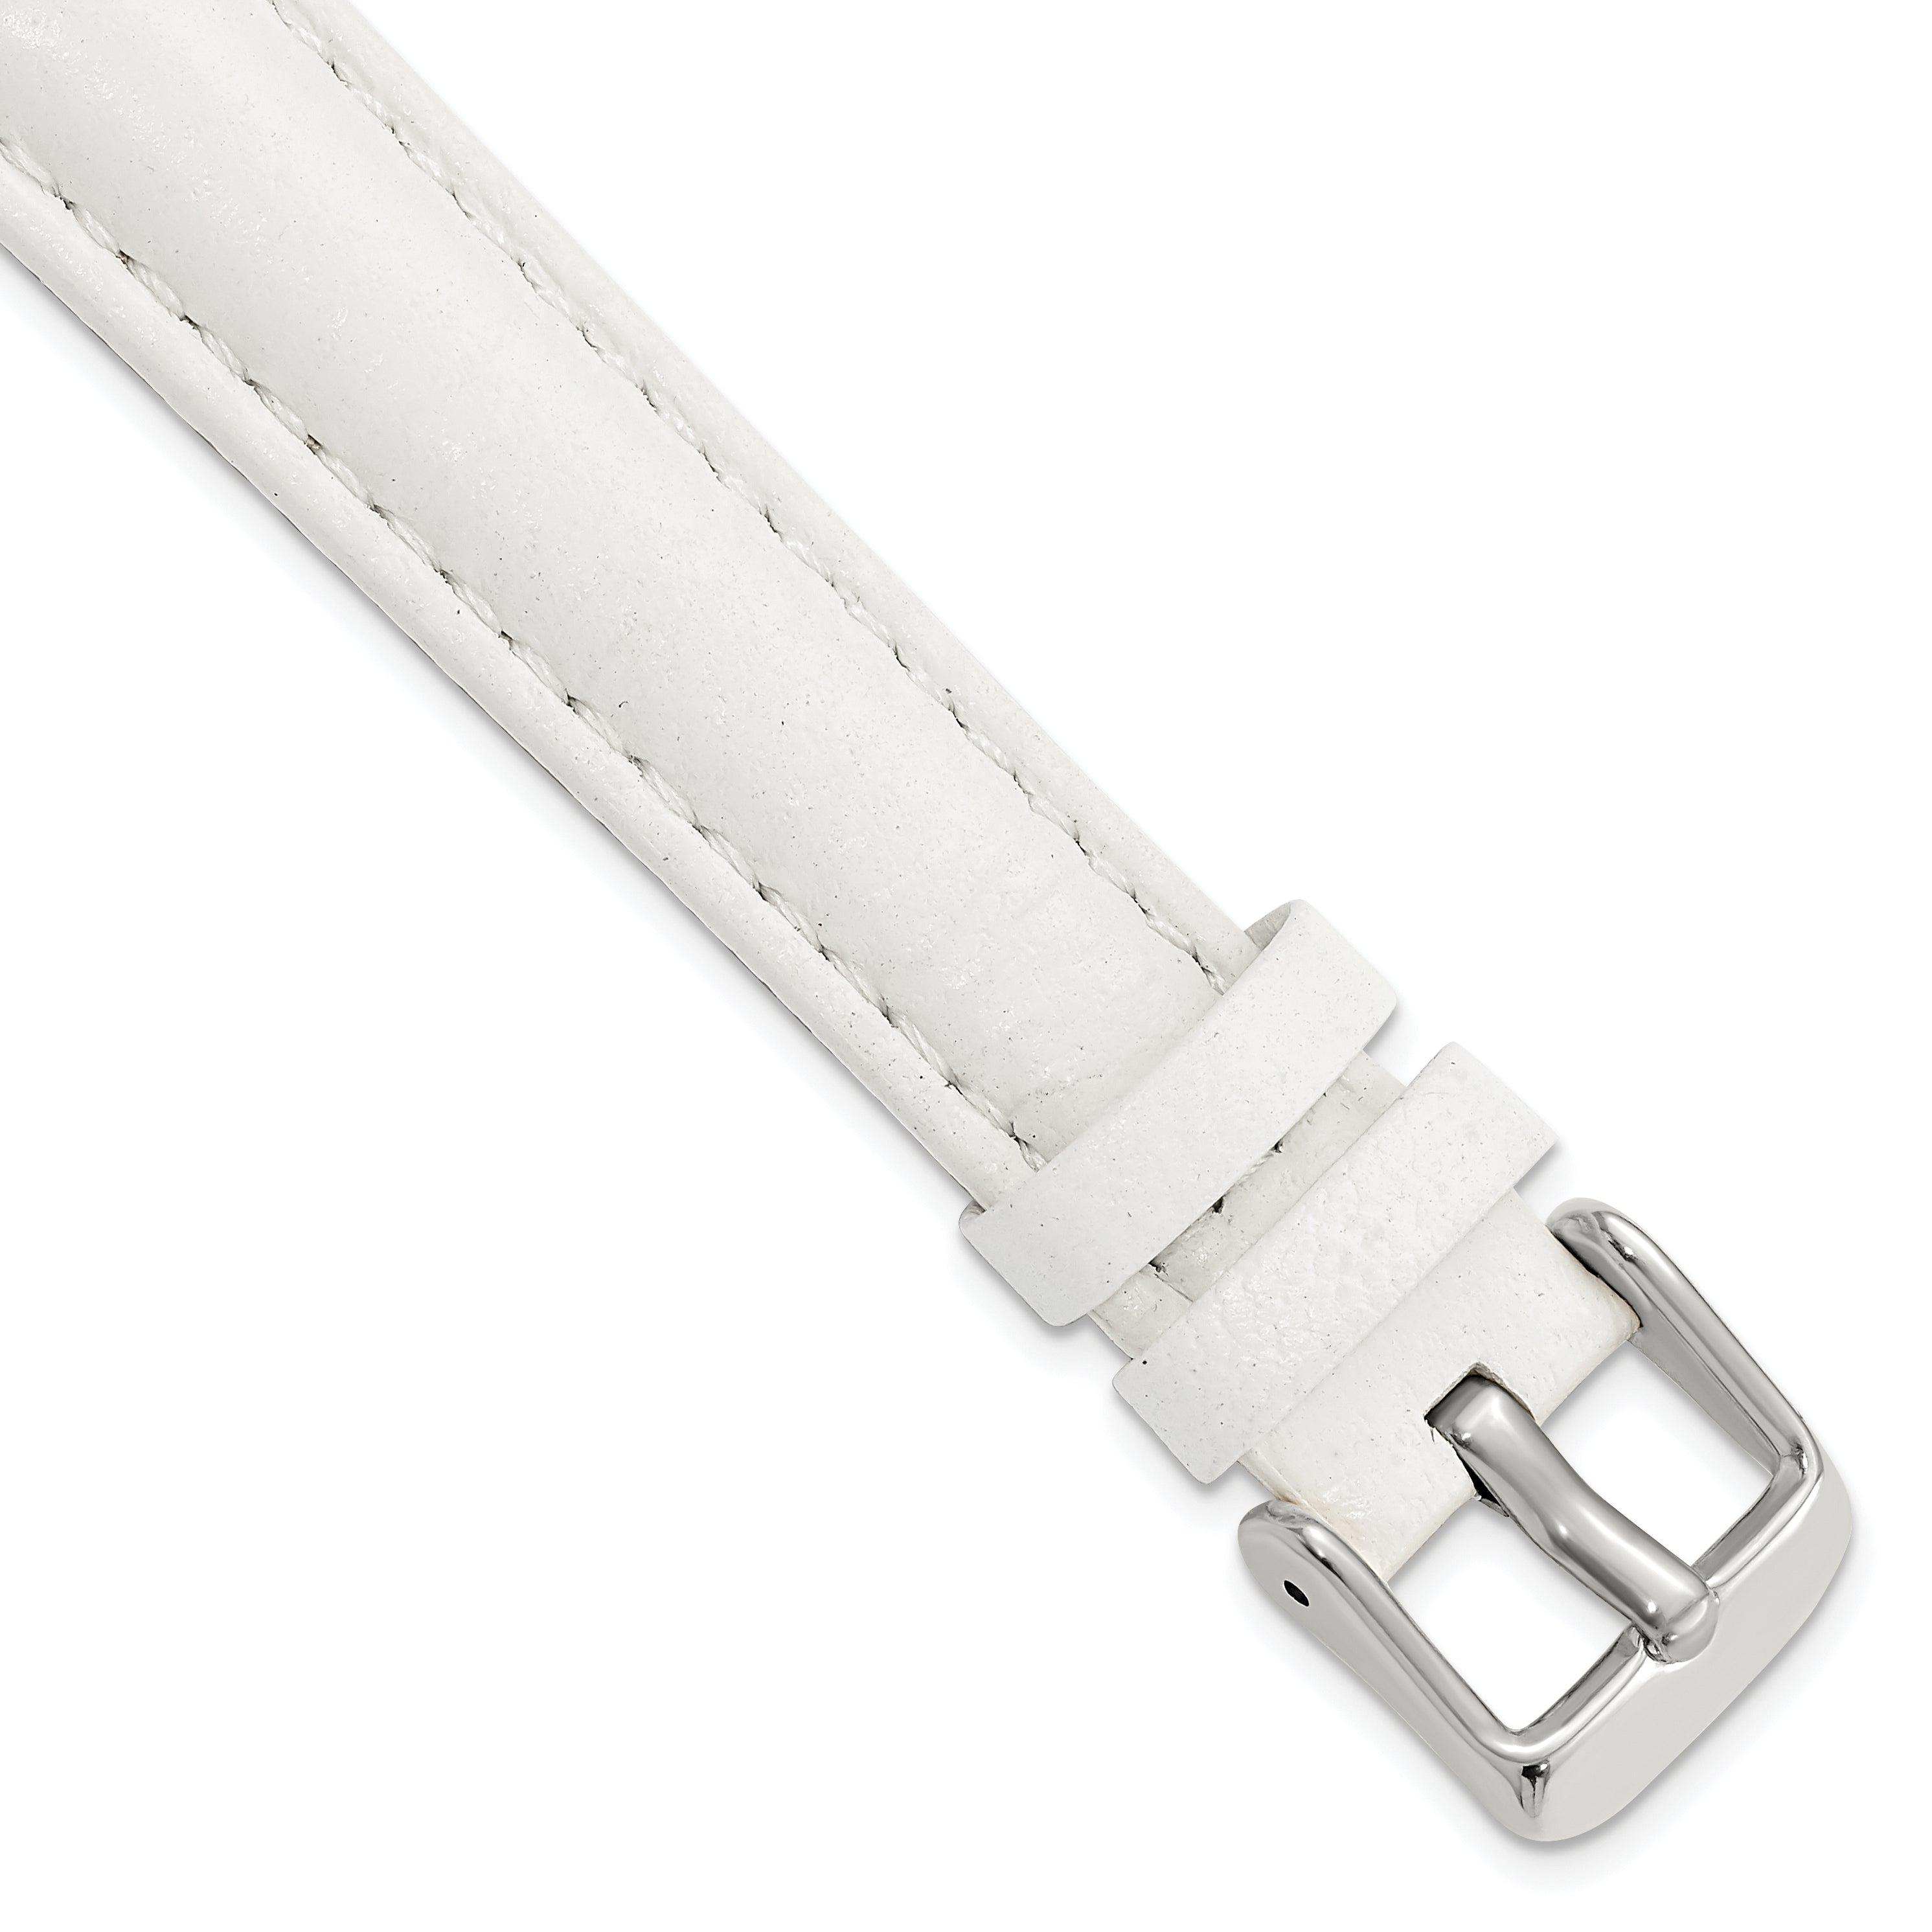 DeBeer 16mm White Glove Leather with Silver-tone Panerai Style Buckle 7.75 inch Watch Band